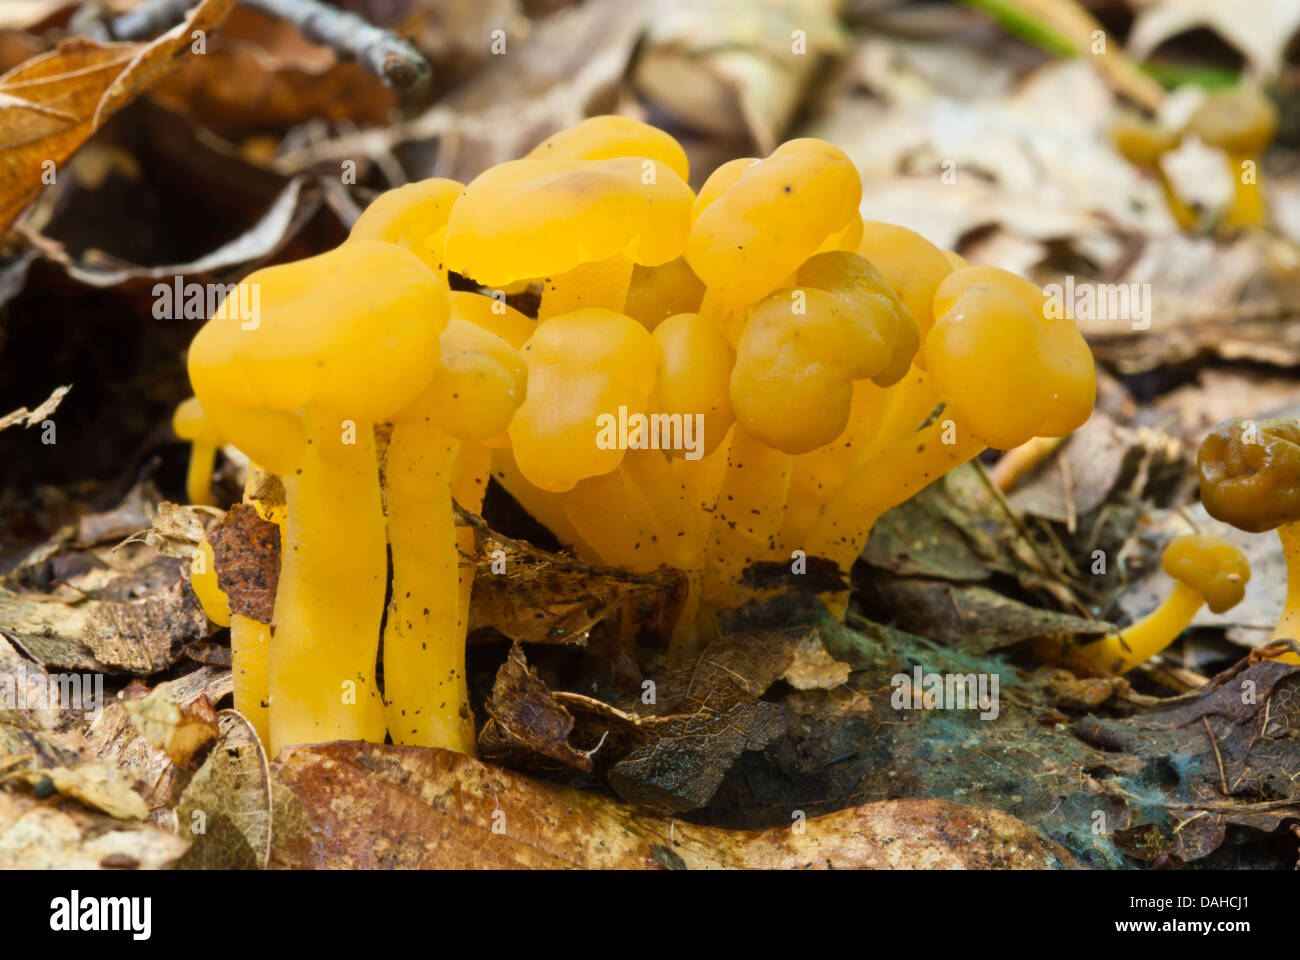 Jelly baby fungus growing on forest floor, Frontenac Provincial Park, Ontario Stock Photo